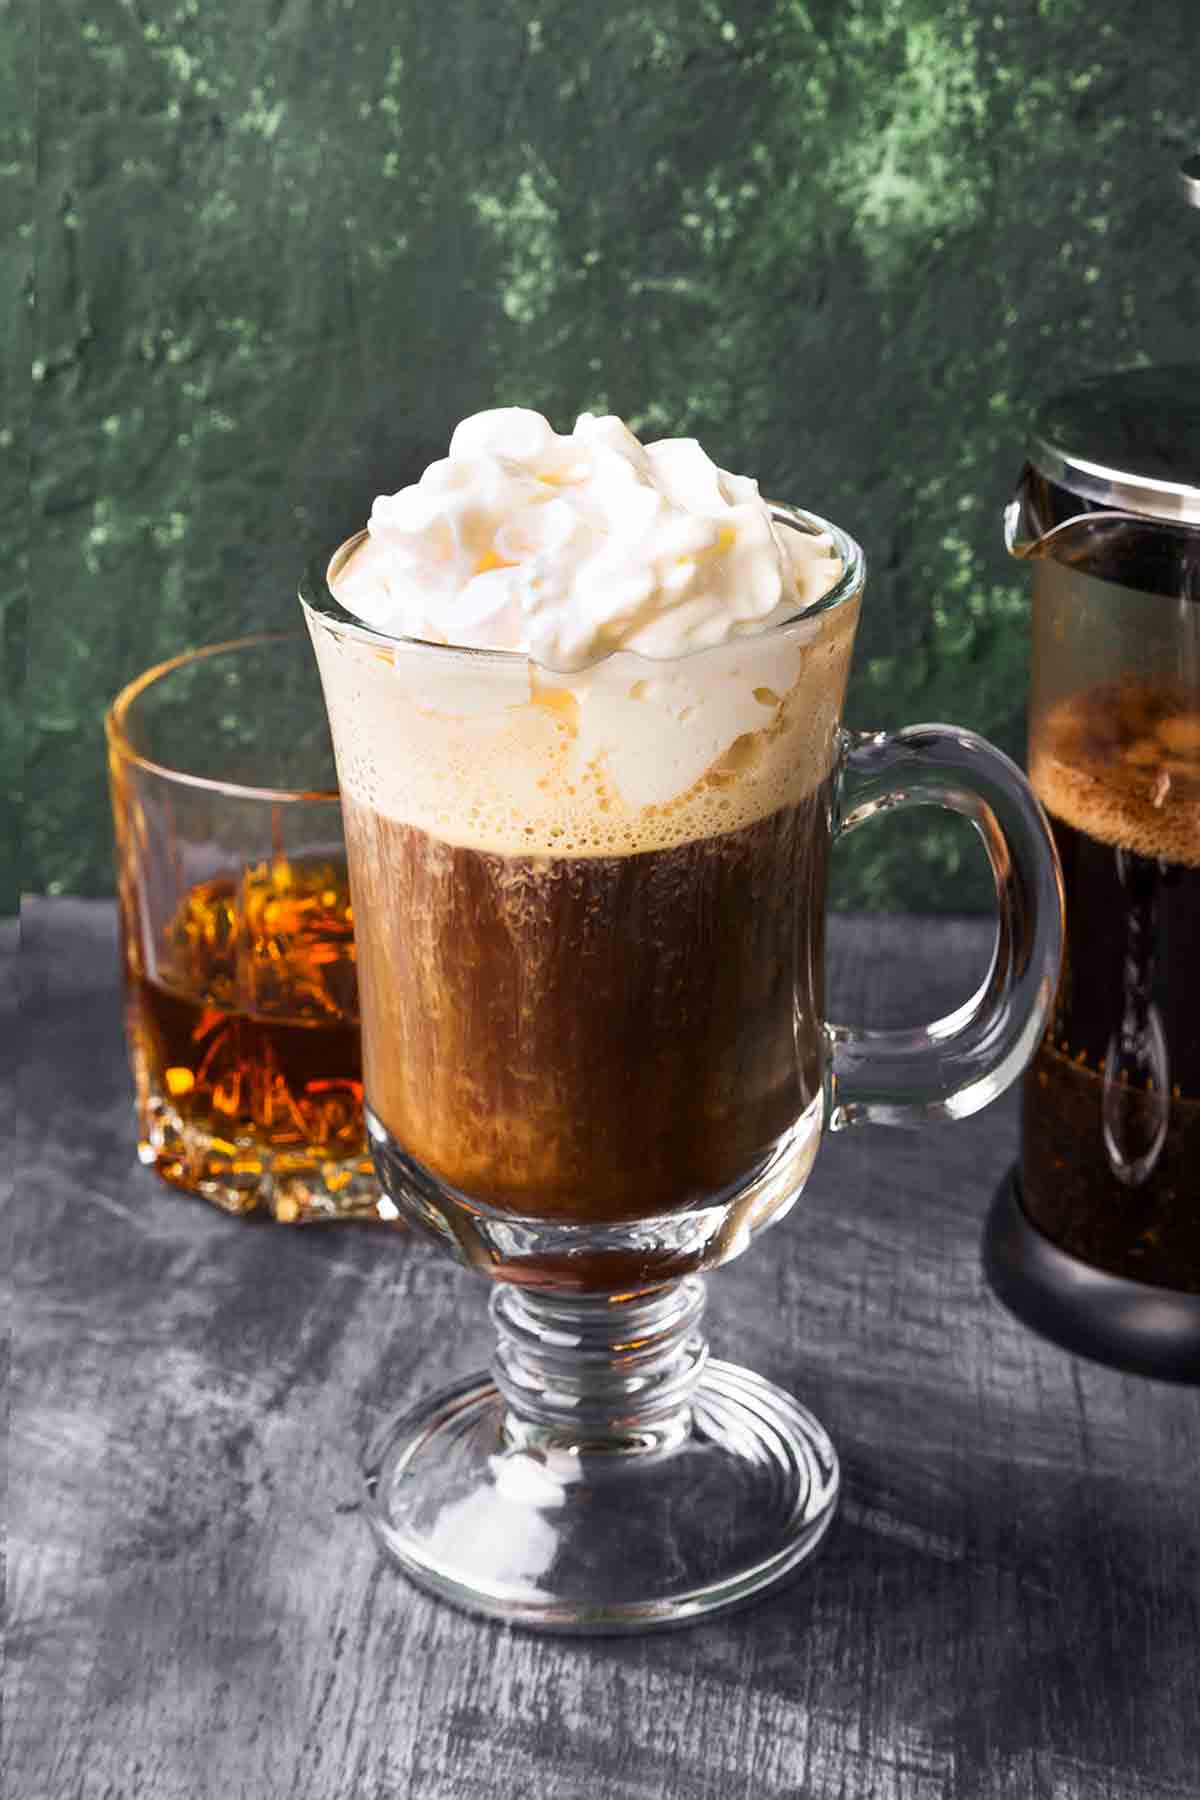 A tall glass mug filled with Irish coffee topped with whipped cream and a tumbler or whiskey in the background.